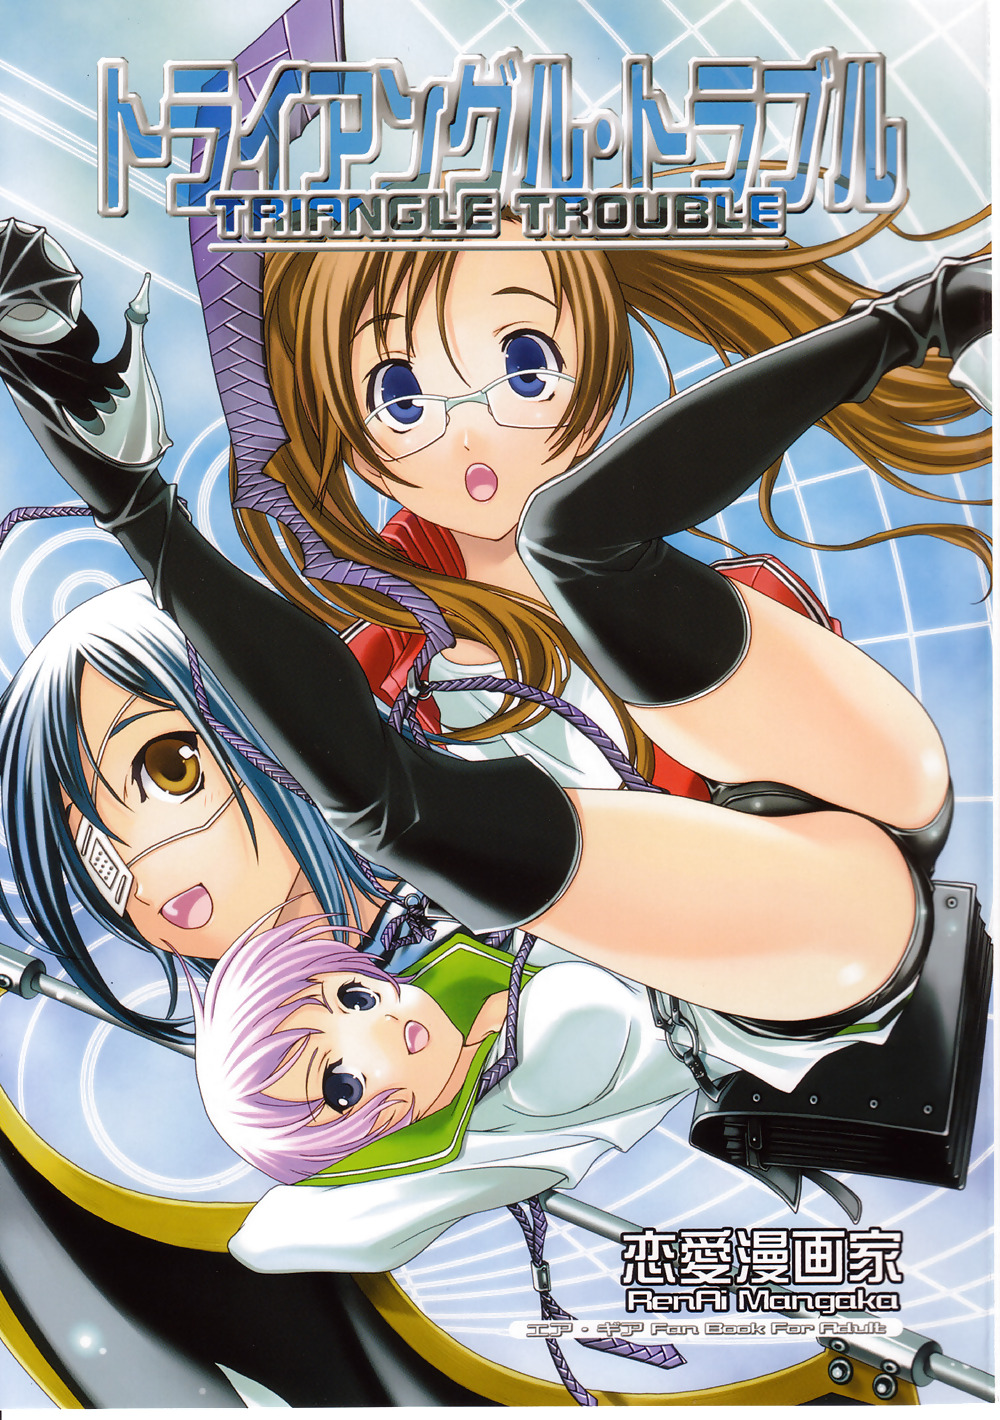 Air Gear - Triangle Trouble #2588250